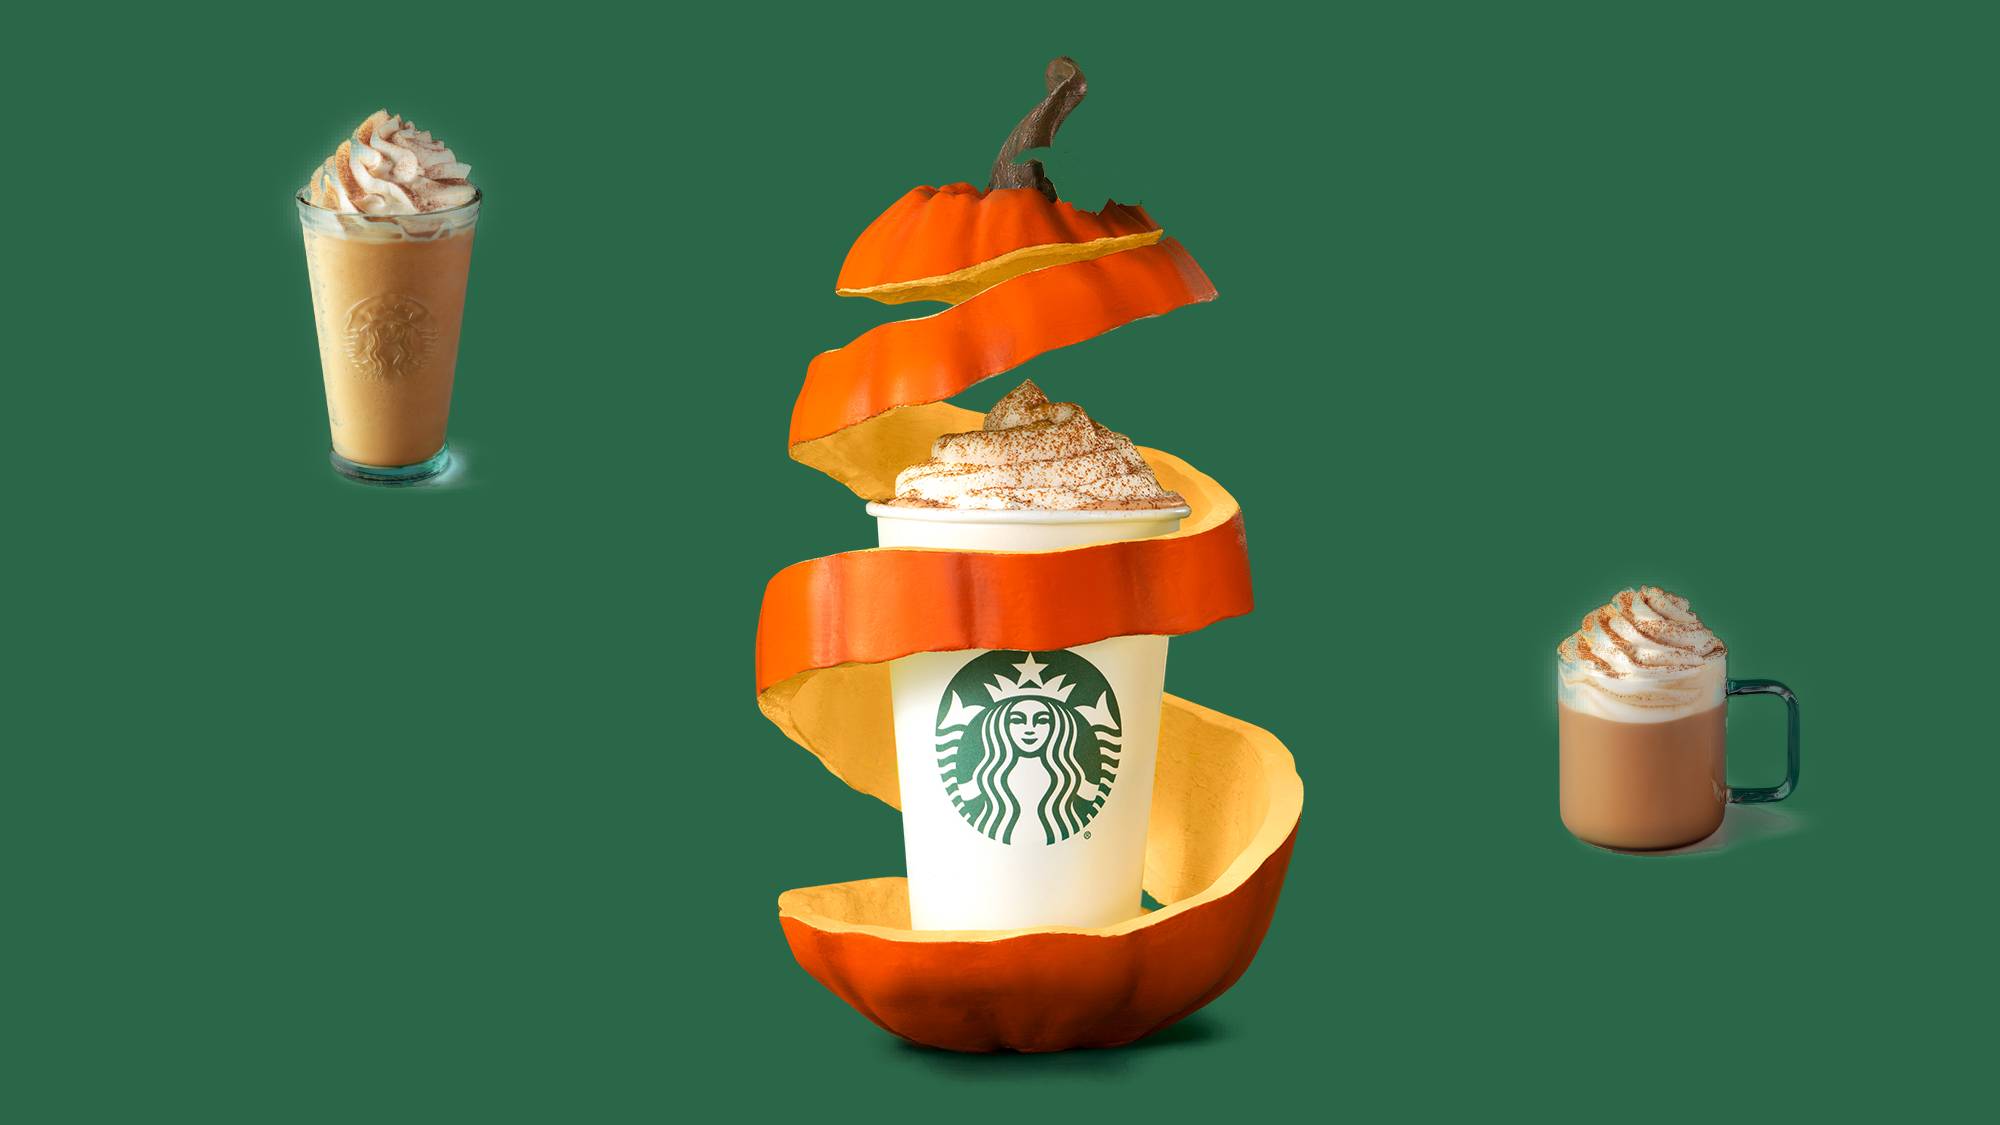 It's that time of year again the Starbucks Pumpkin Spice Latte is